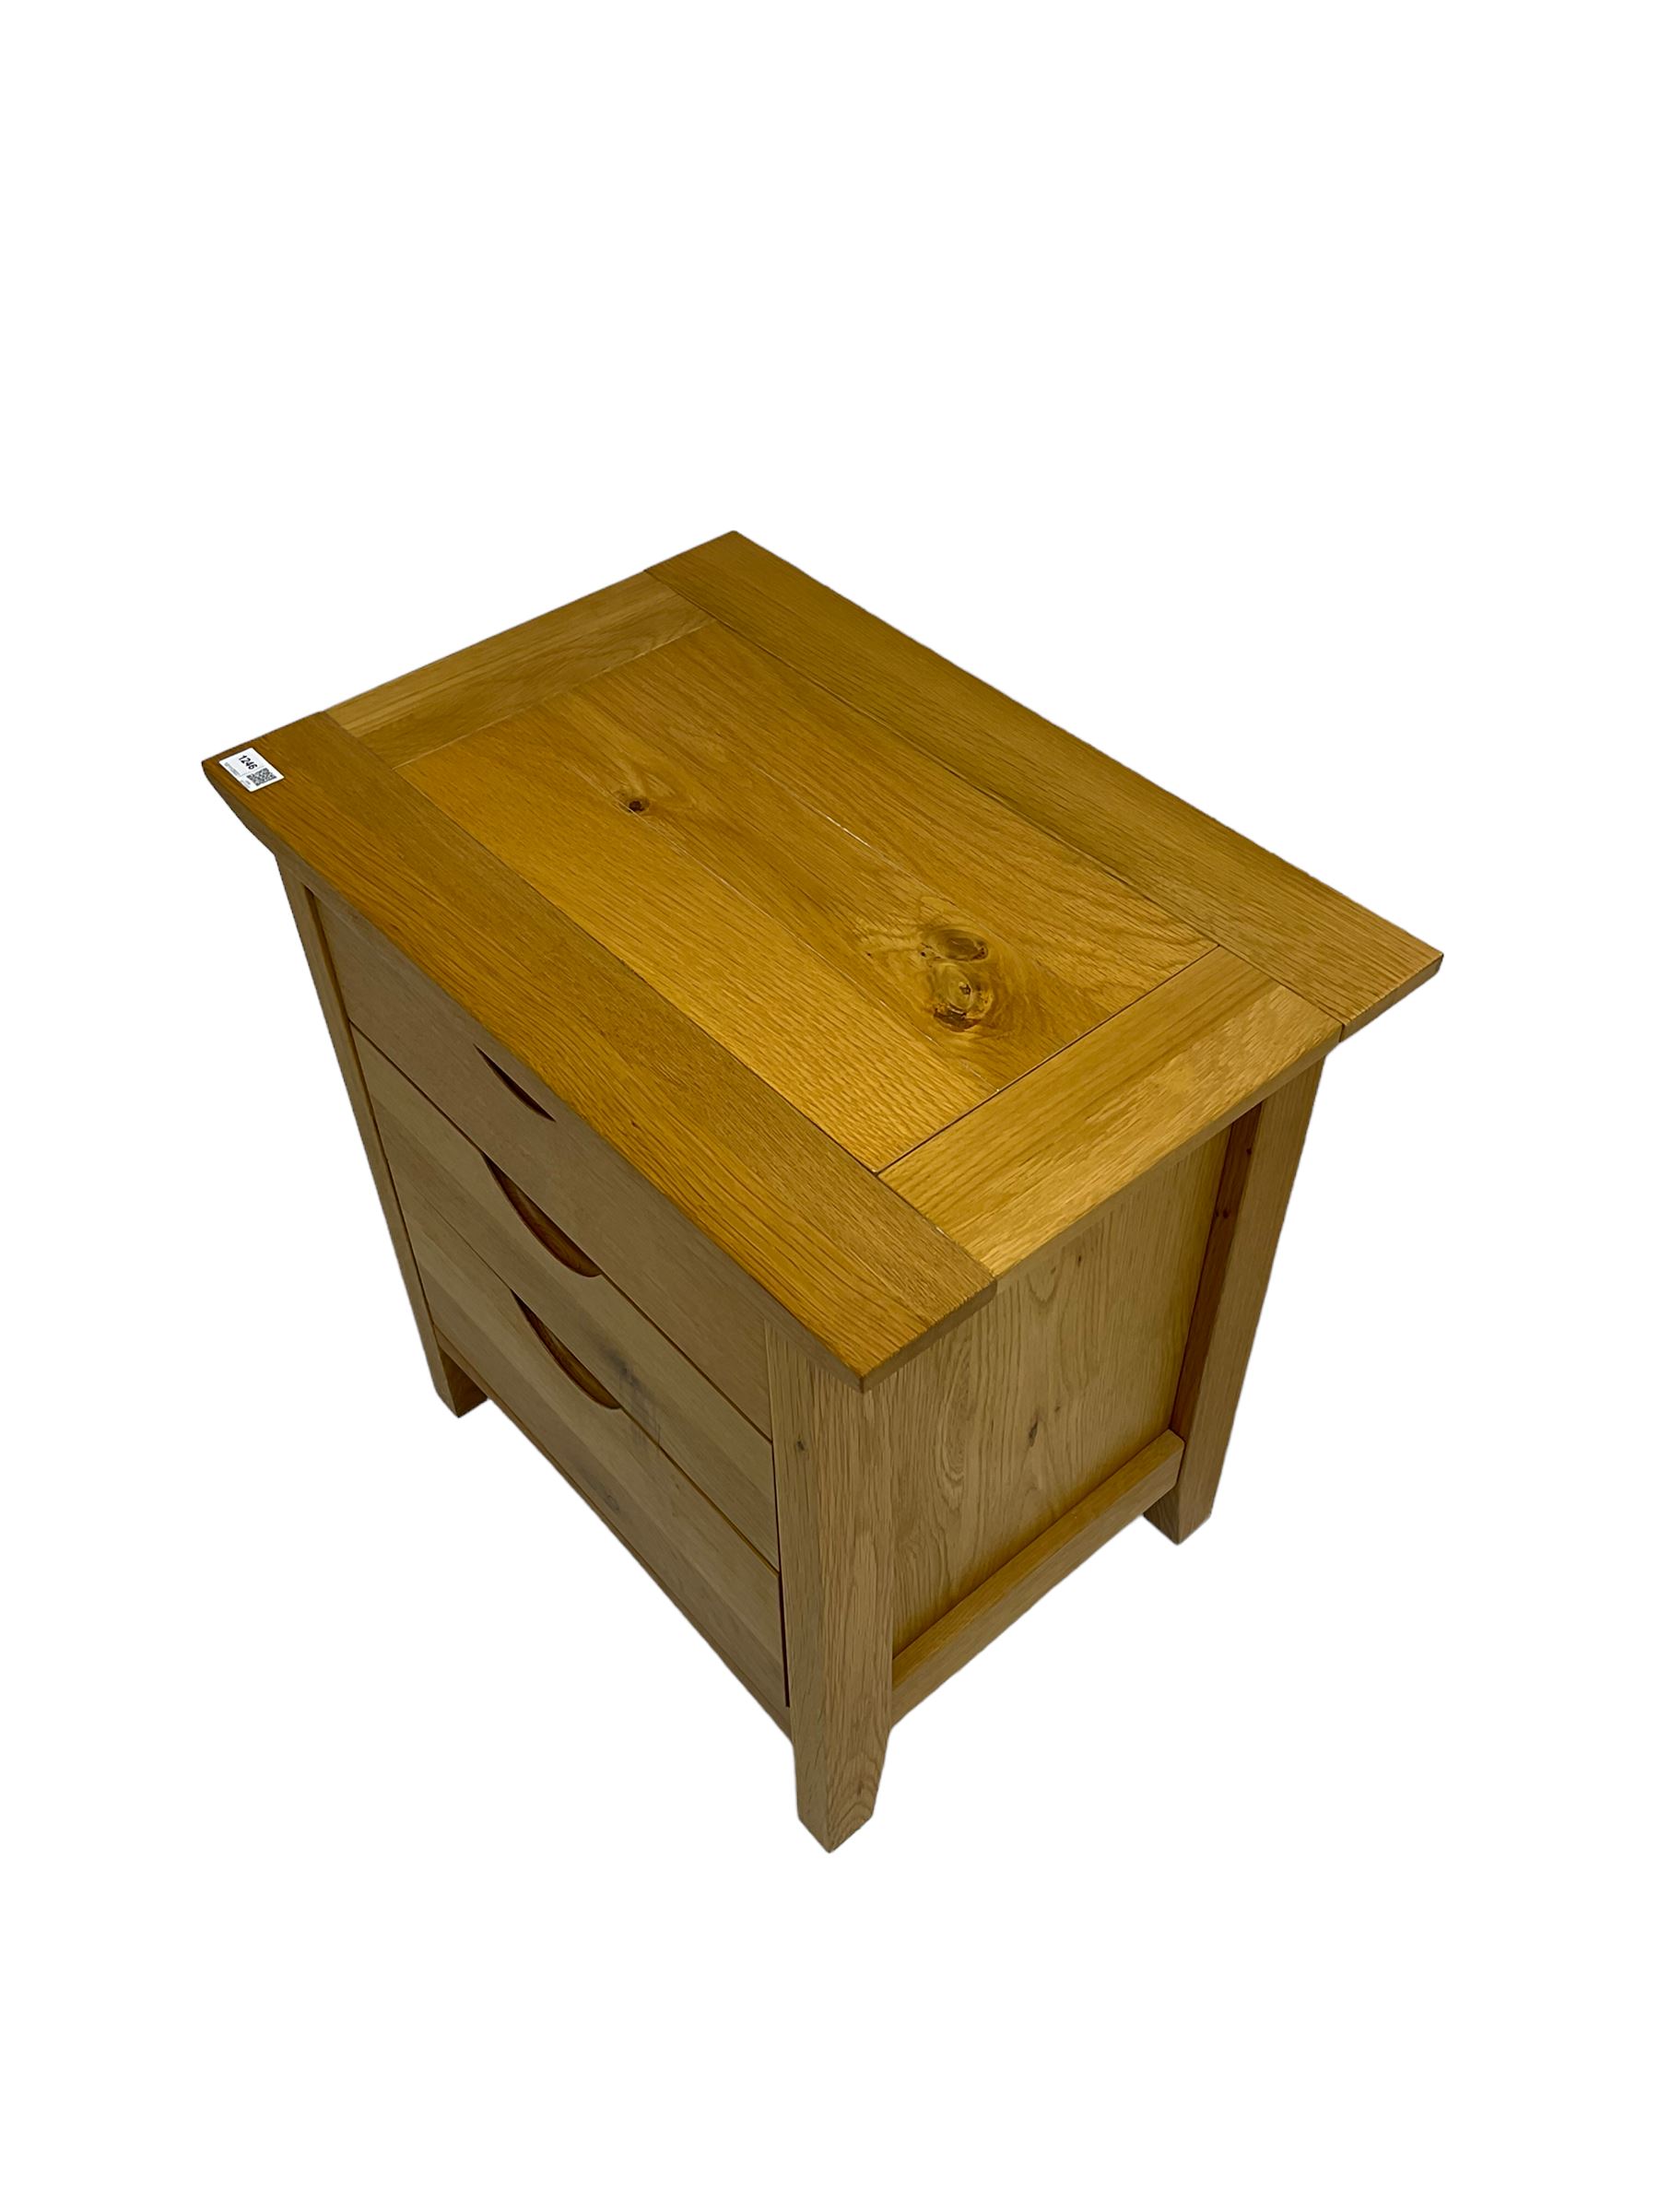 Oak bedside chest fitted with three drawers - Image 6 of 6